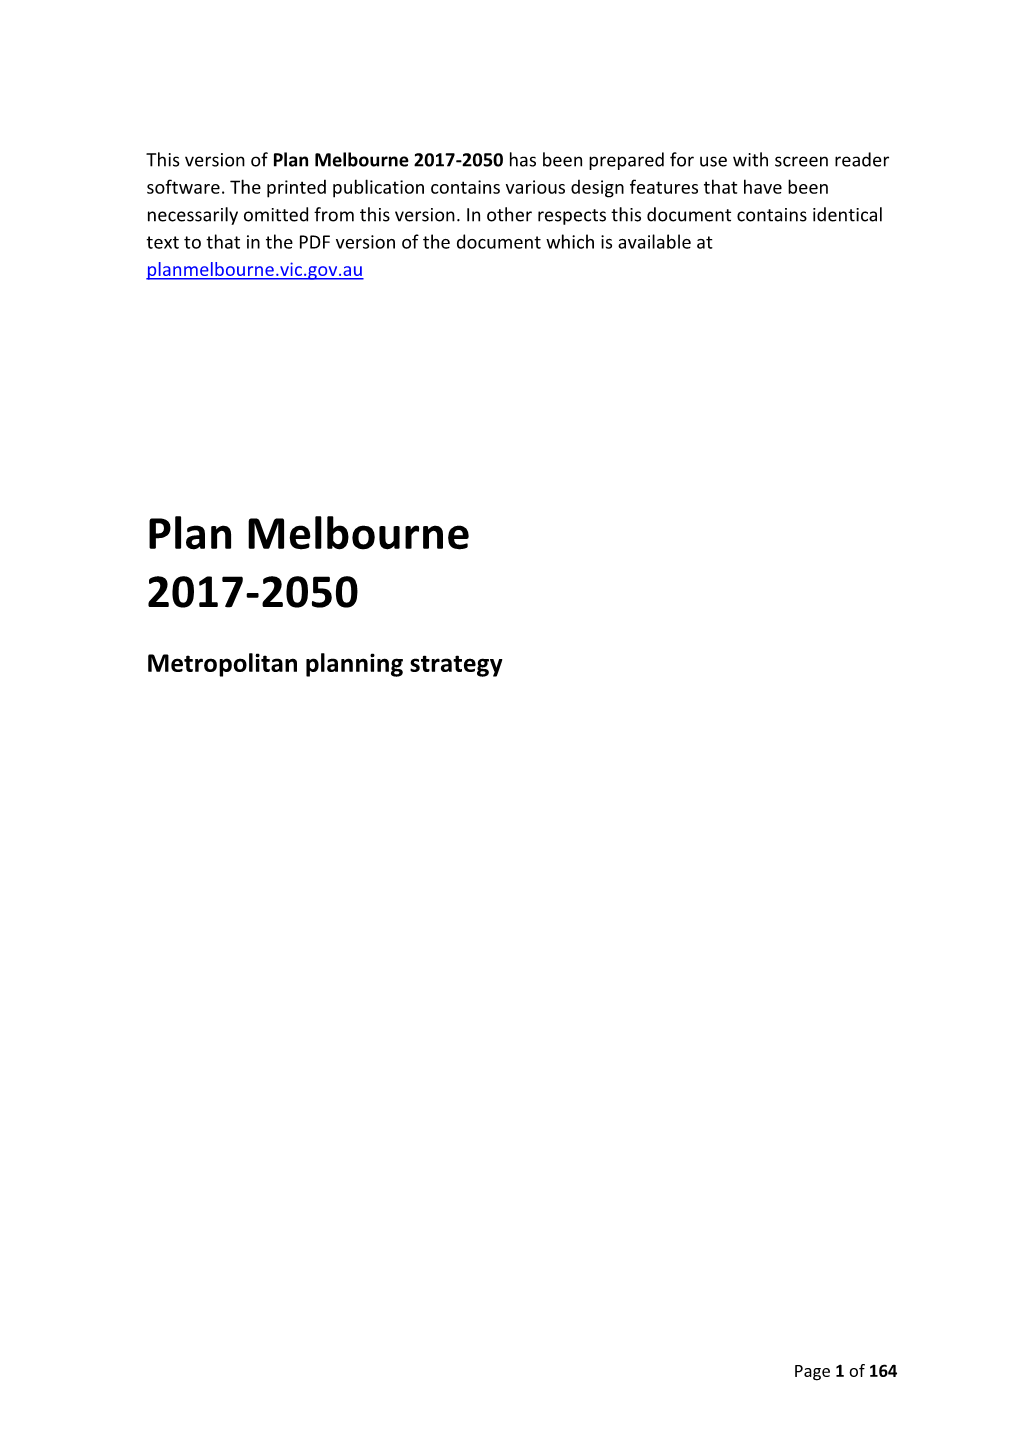 Plan Melbourne 2017-2050 Has Been Prepared for Use with Screen Reader Software